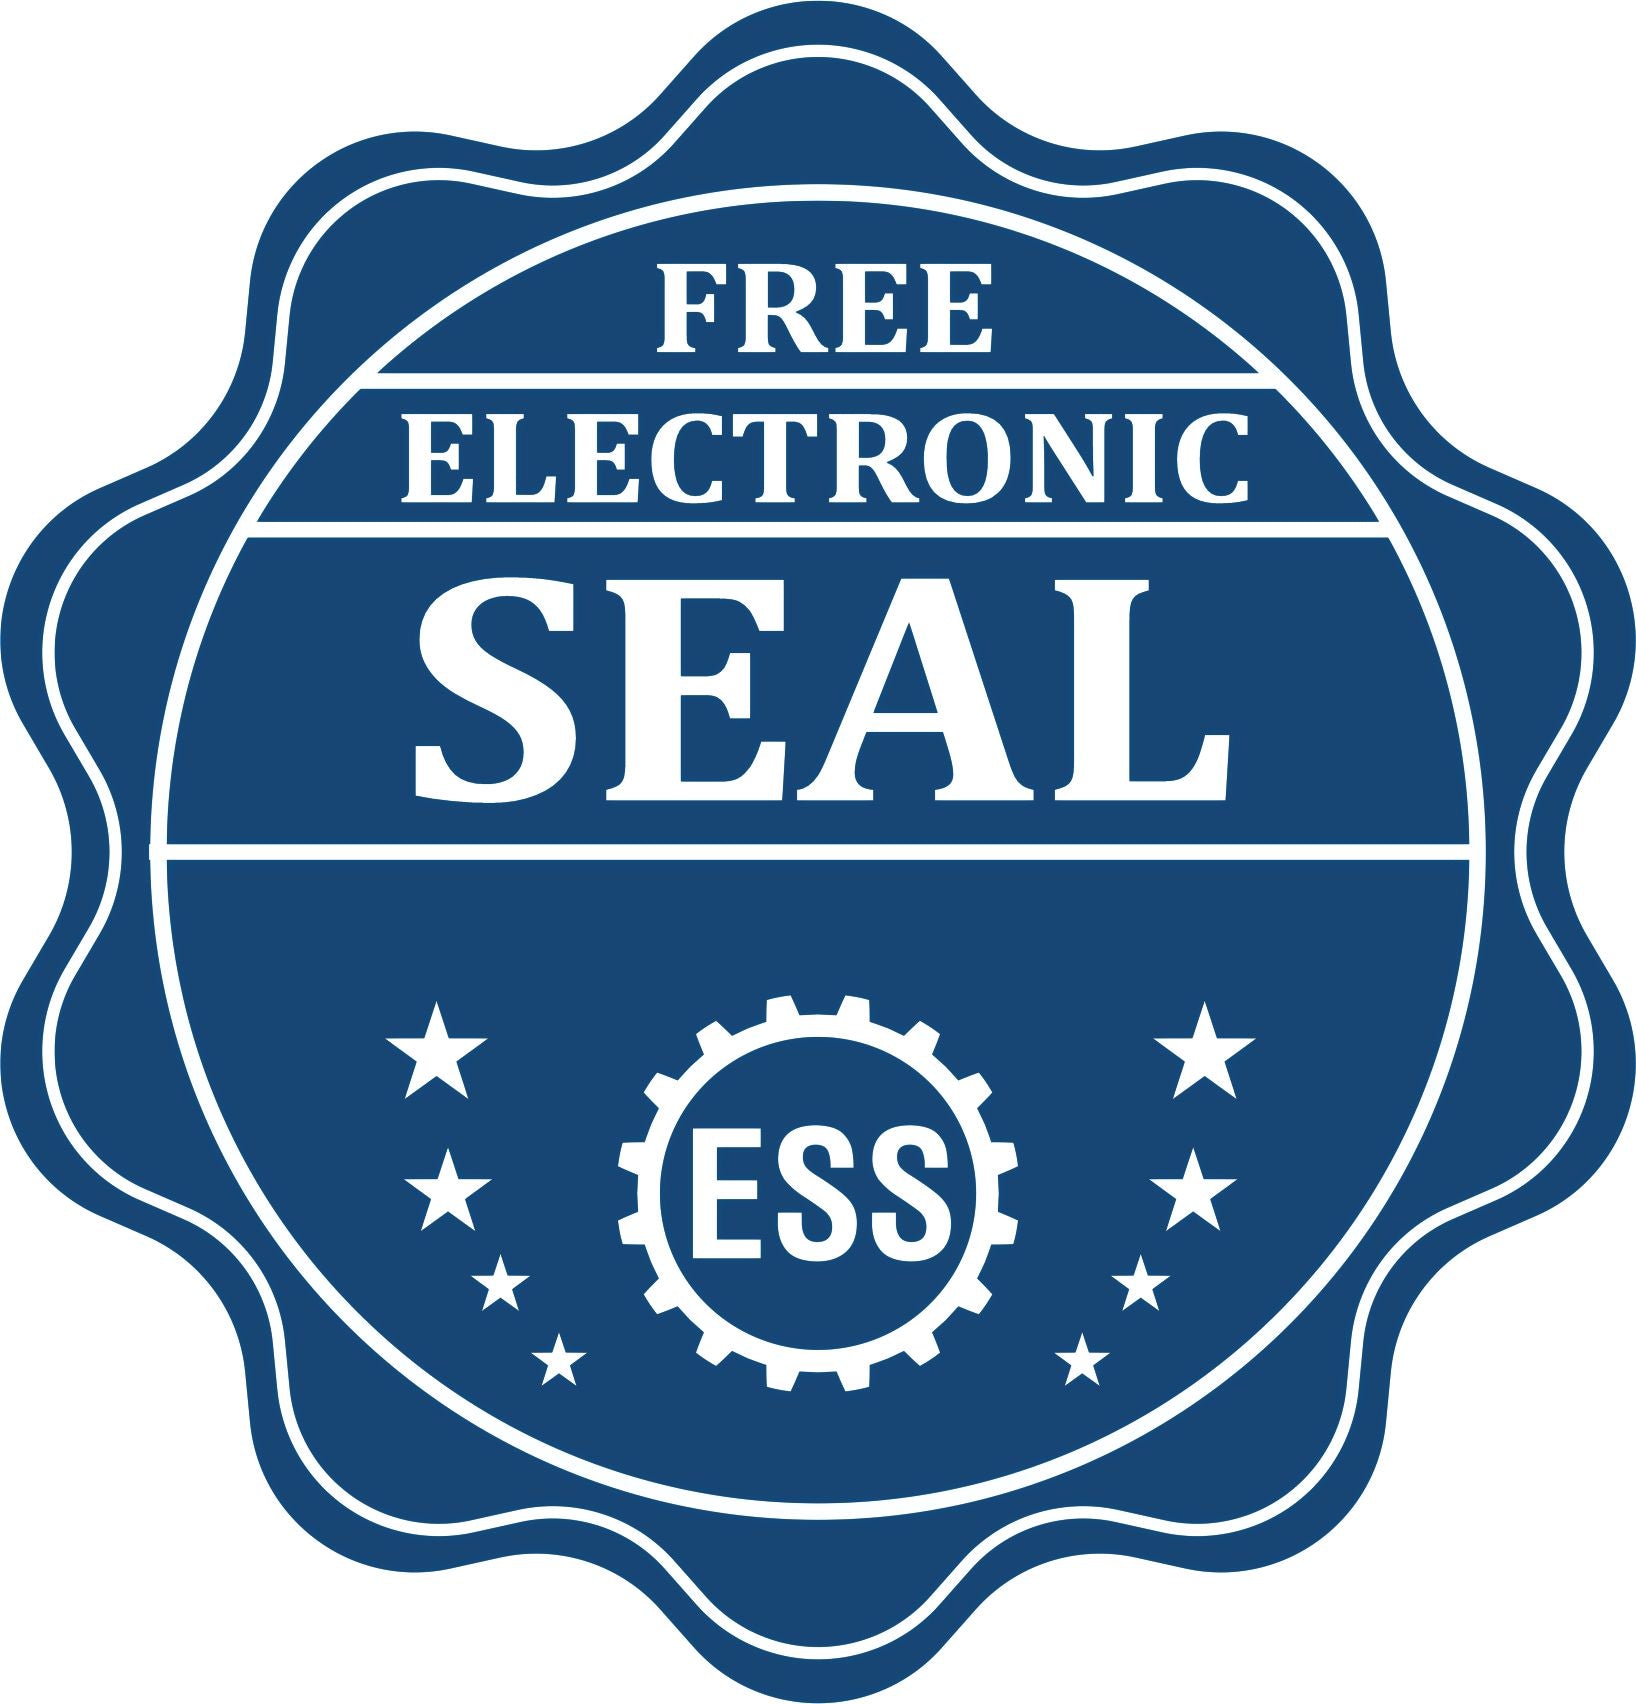 A badge showing a free electronic seal for the North Dakota Desk Surveyor Seal Embosser with stars and the ESS gear on the emblem.